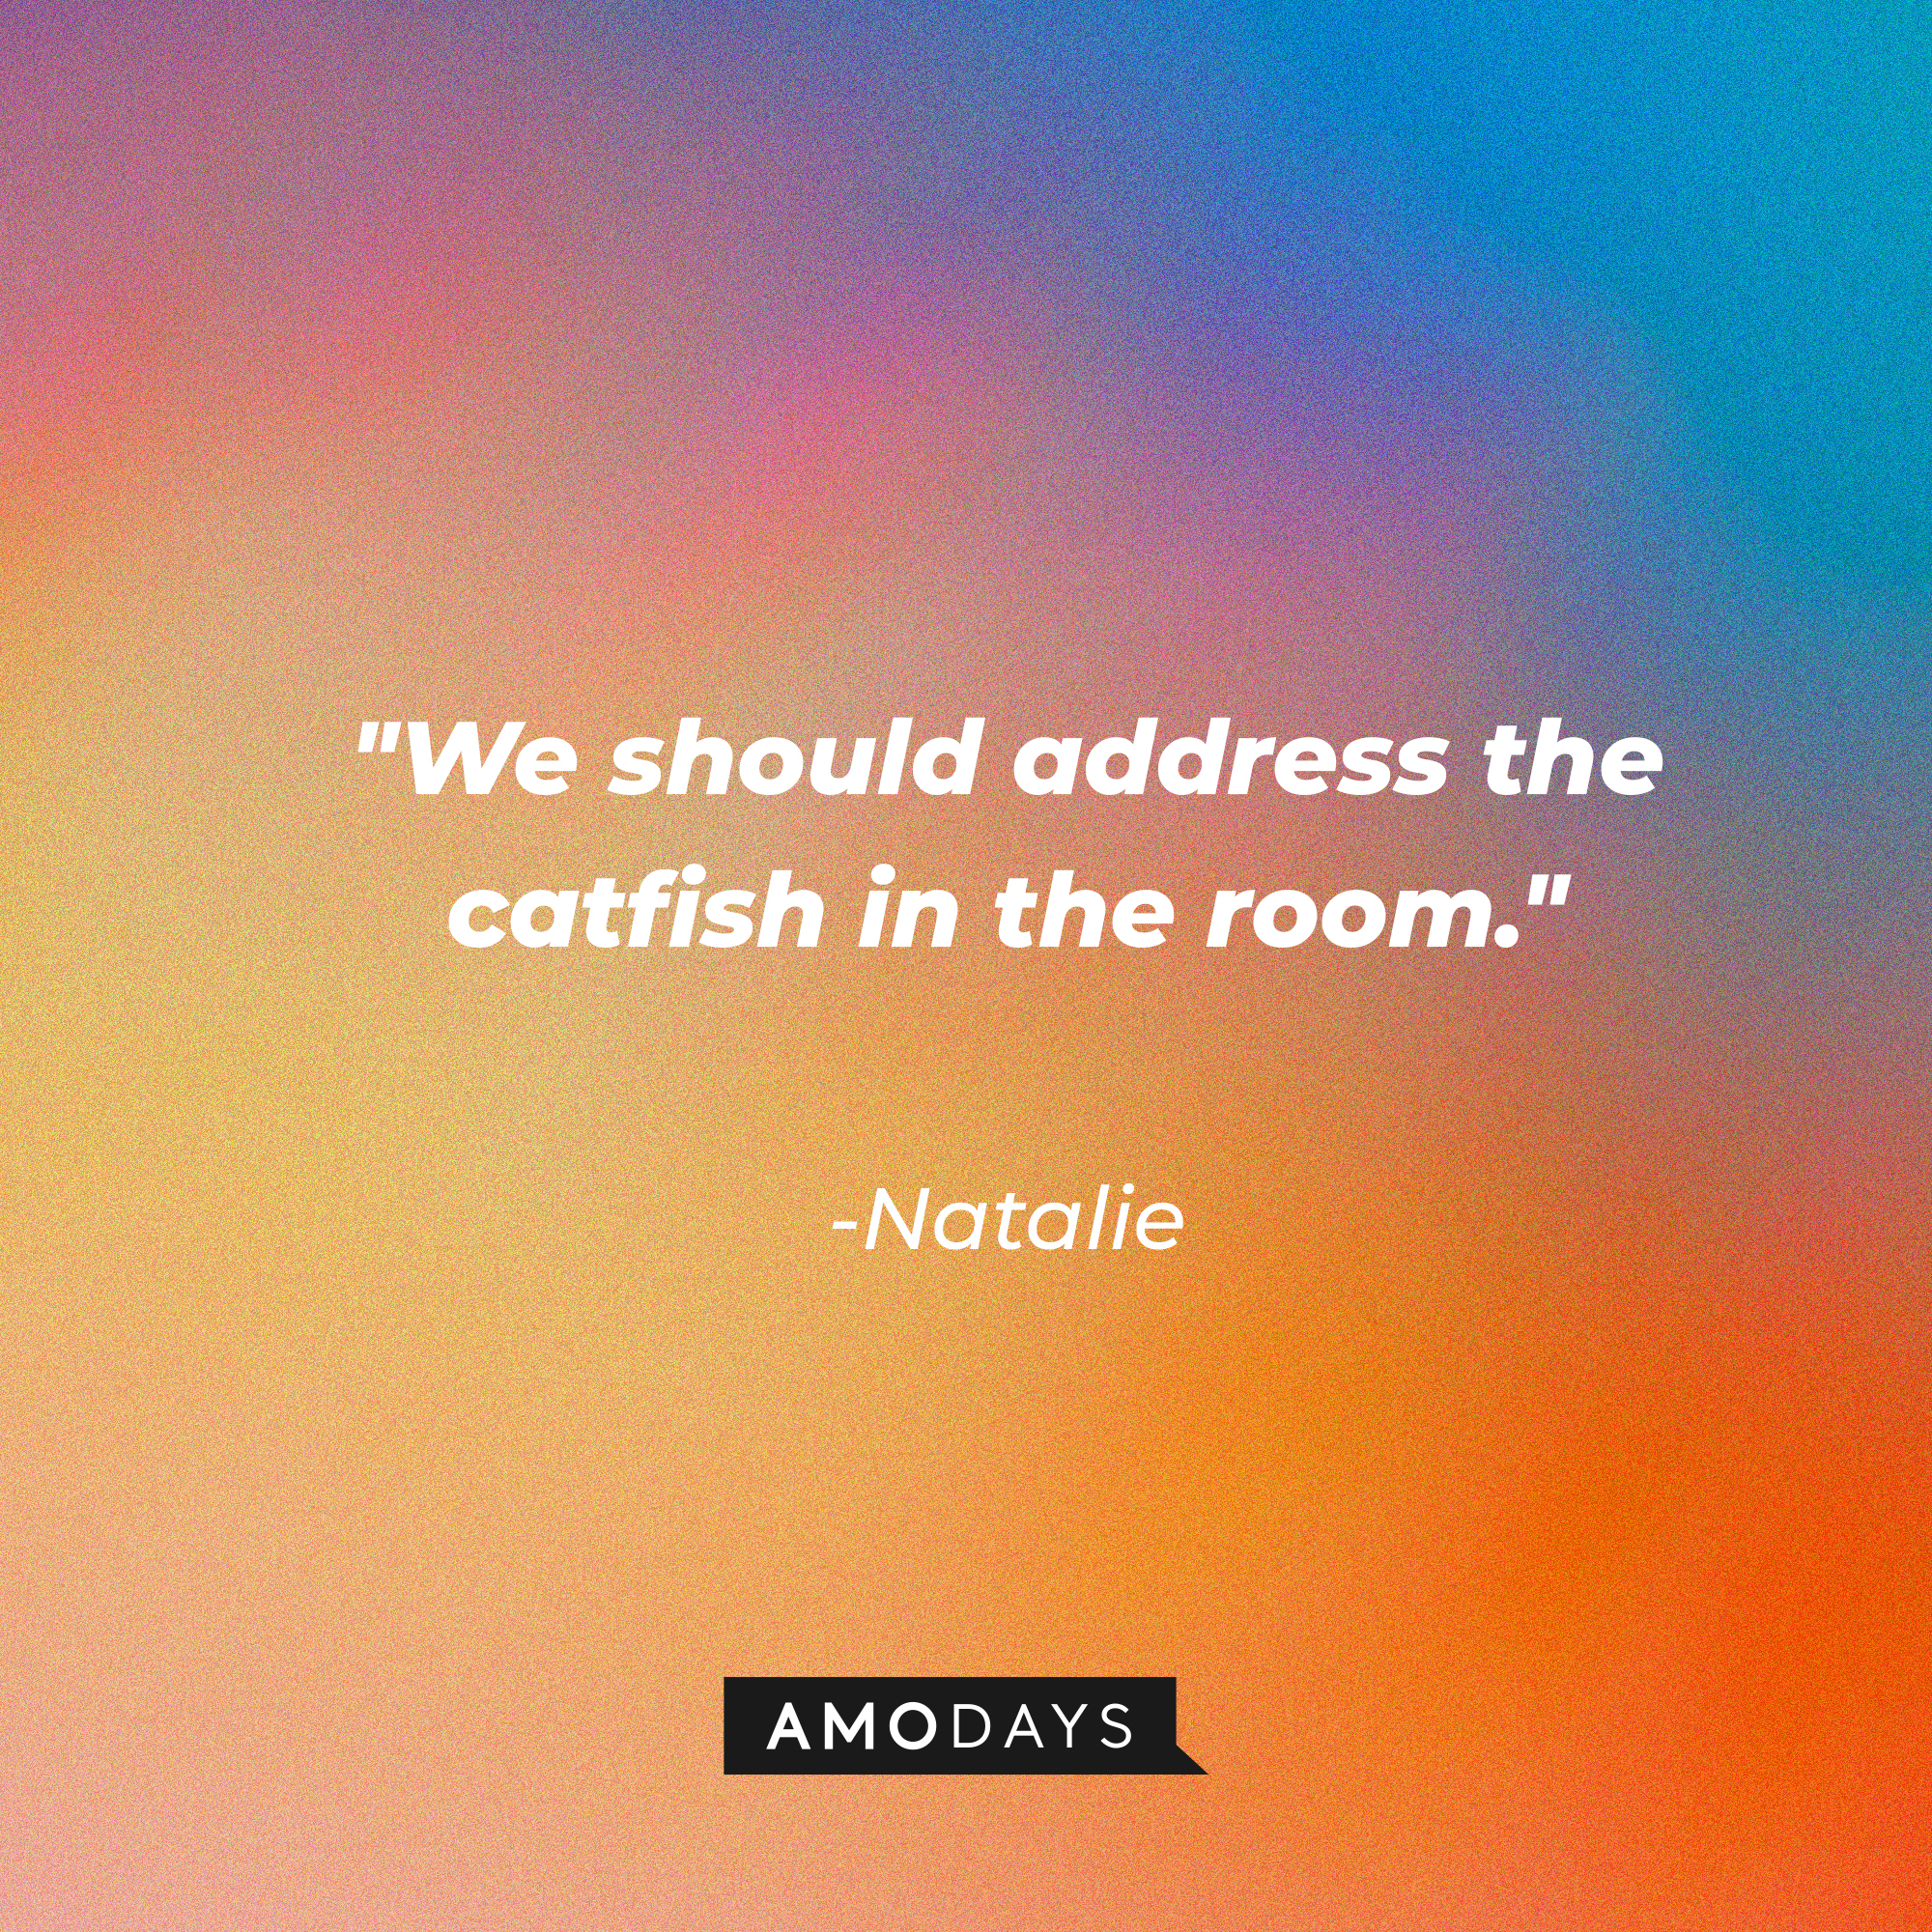 Natalie’s quote: "We should address the catfish in the room." | Source: AmoDays